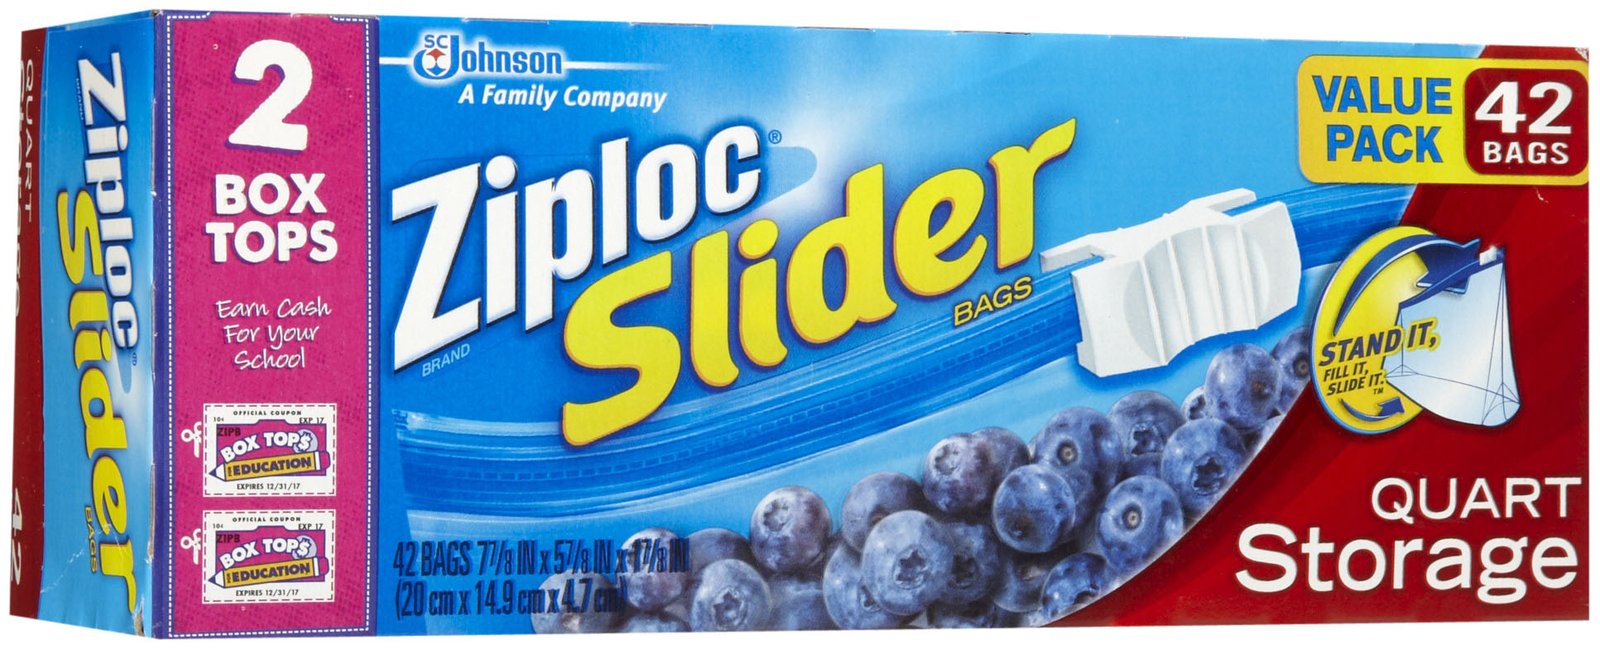 Ziploc Bags Value Sized Slider Bags Only $3.86 at Target (Reg. $7.59)